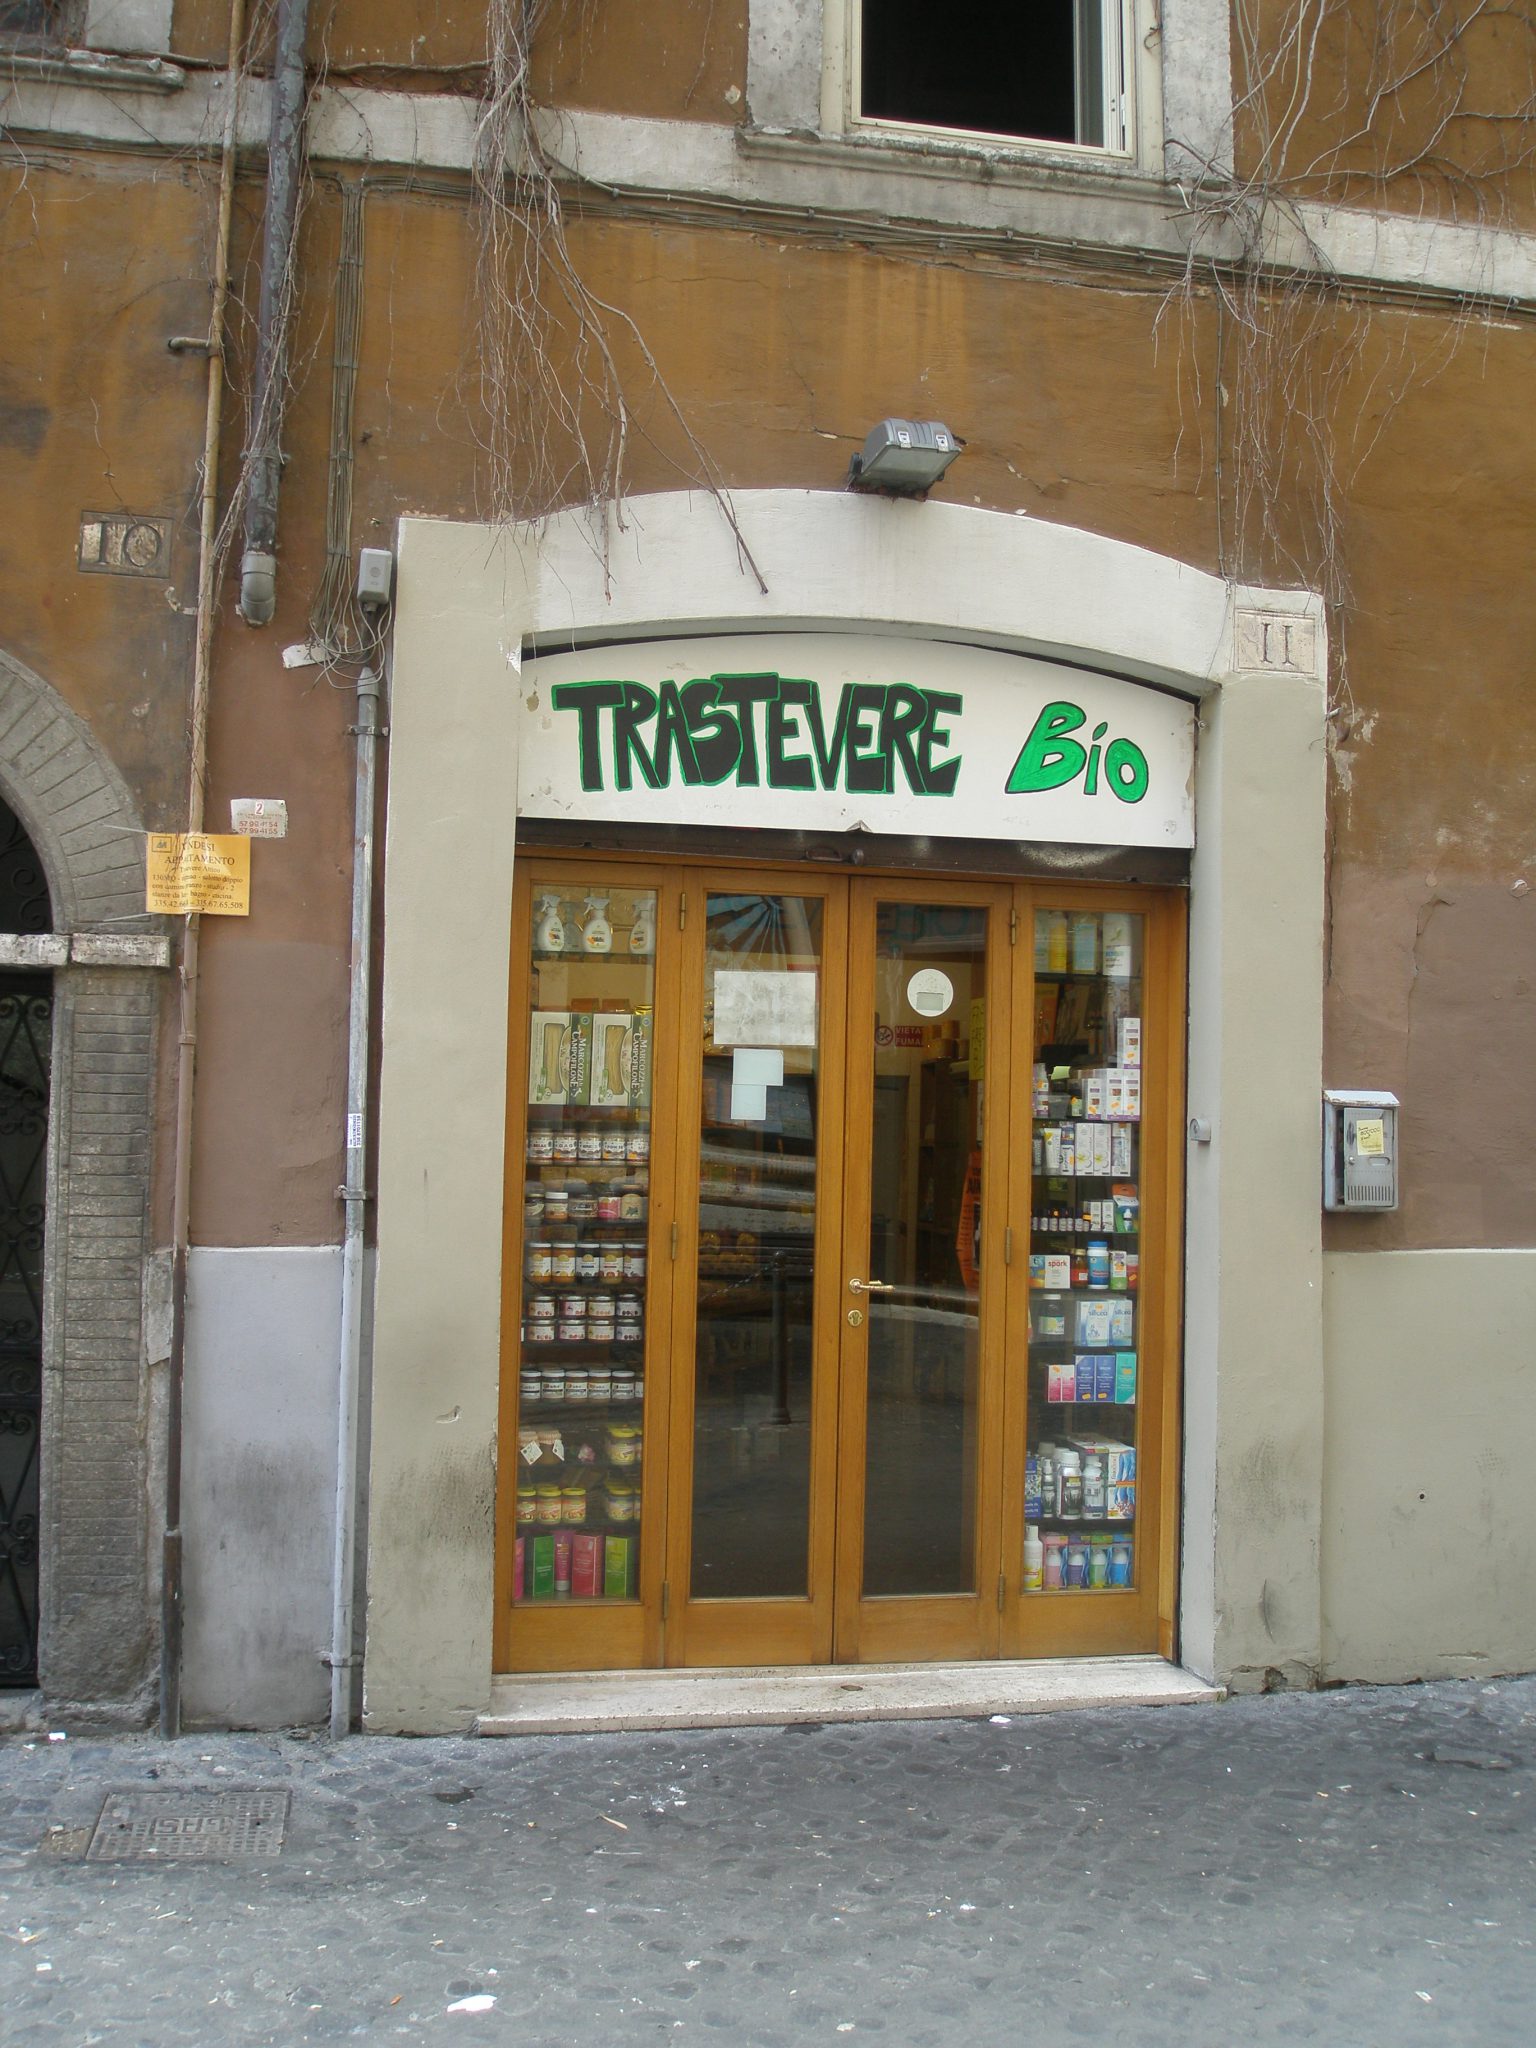 This is the easy-to-miss Natural Food Store on via Benedetta, in Trastevere, that Mia Thomas-Ruzic revealed to me in 2011.